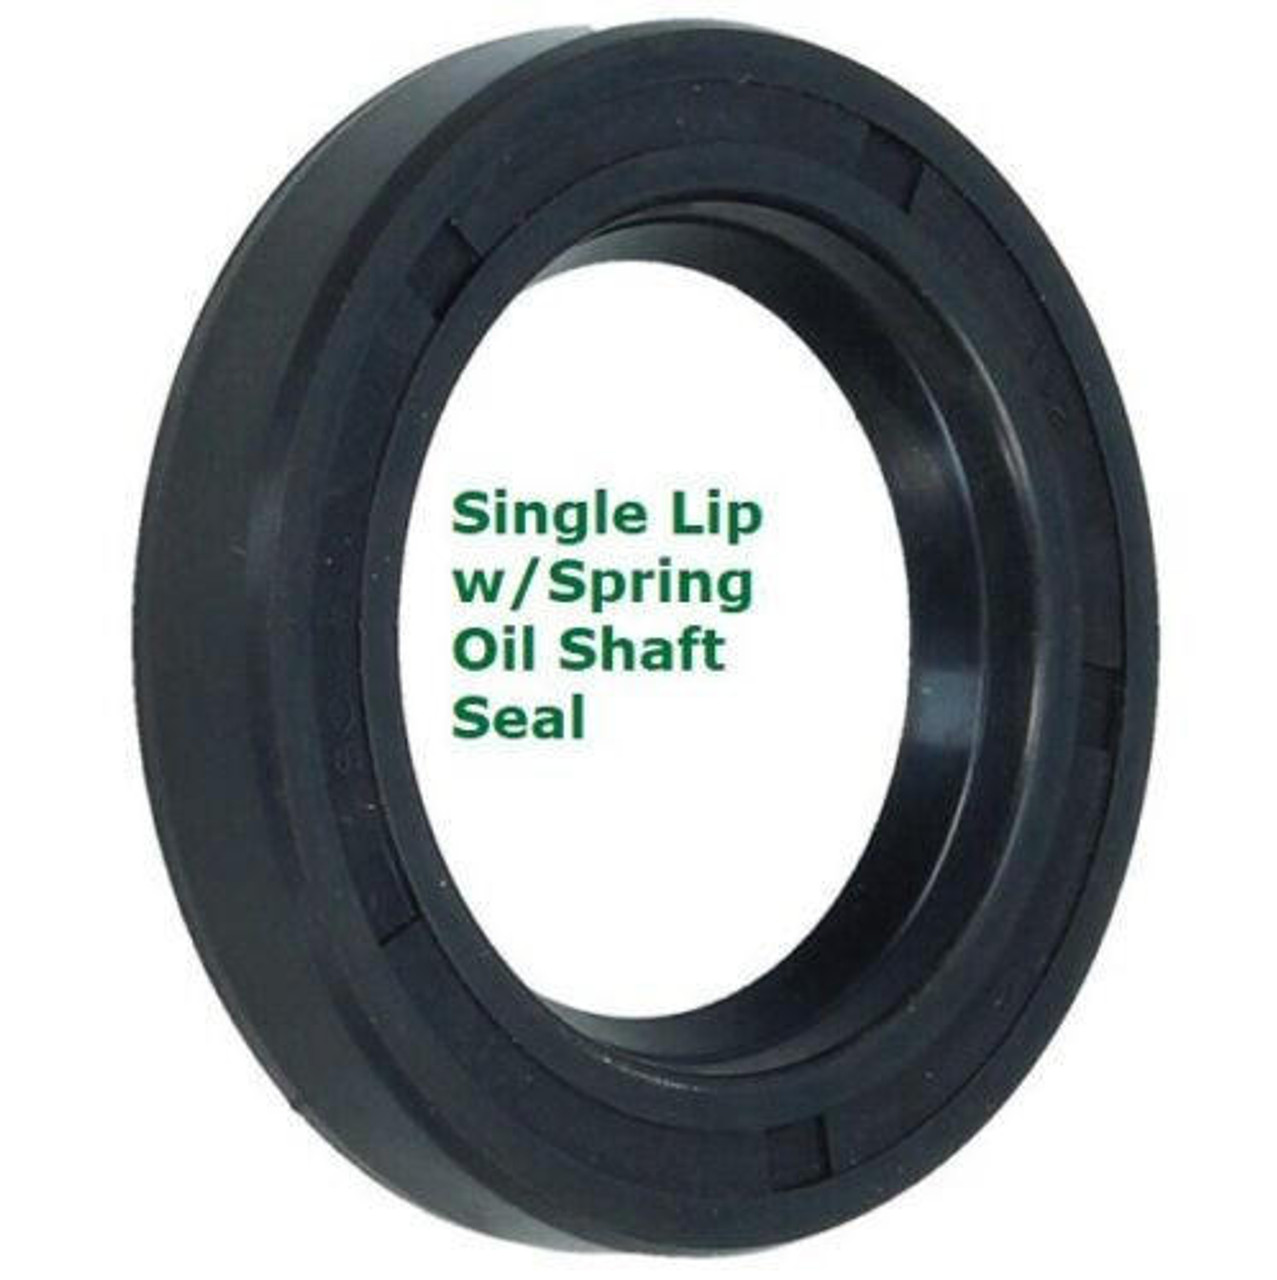 Metric Oil Shaft Seal 60 x 90 x 13mm   Price for 1 pc